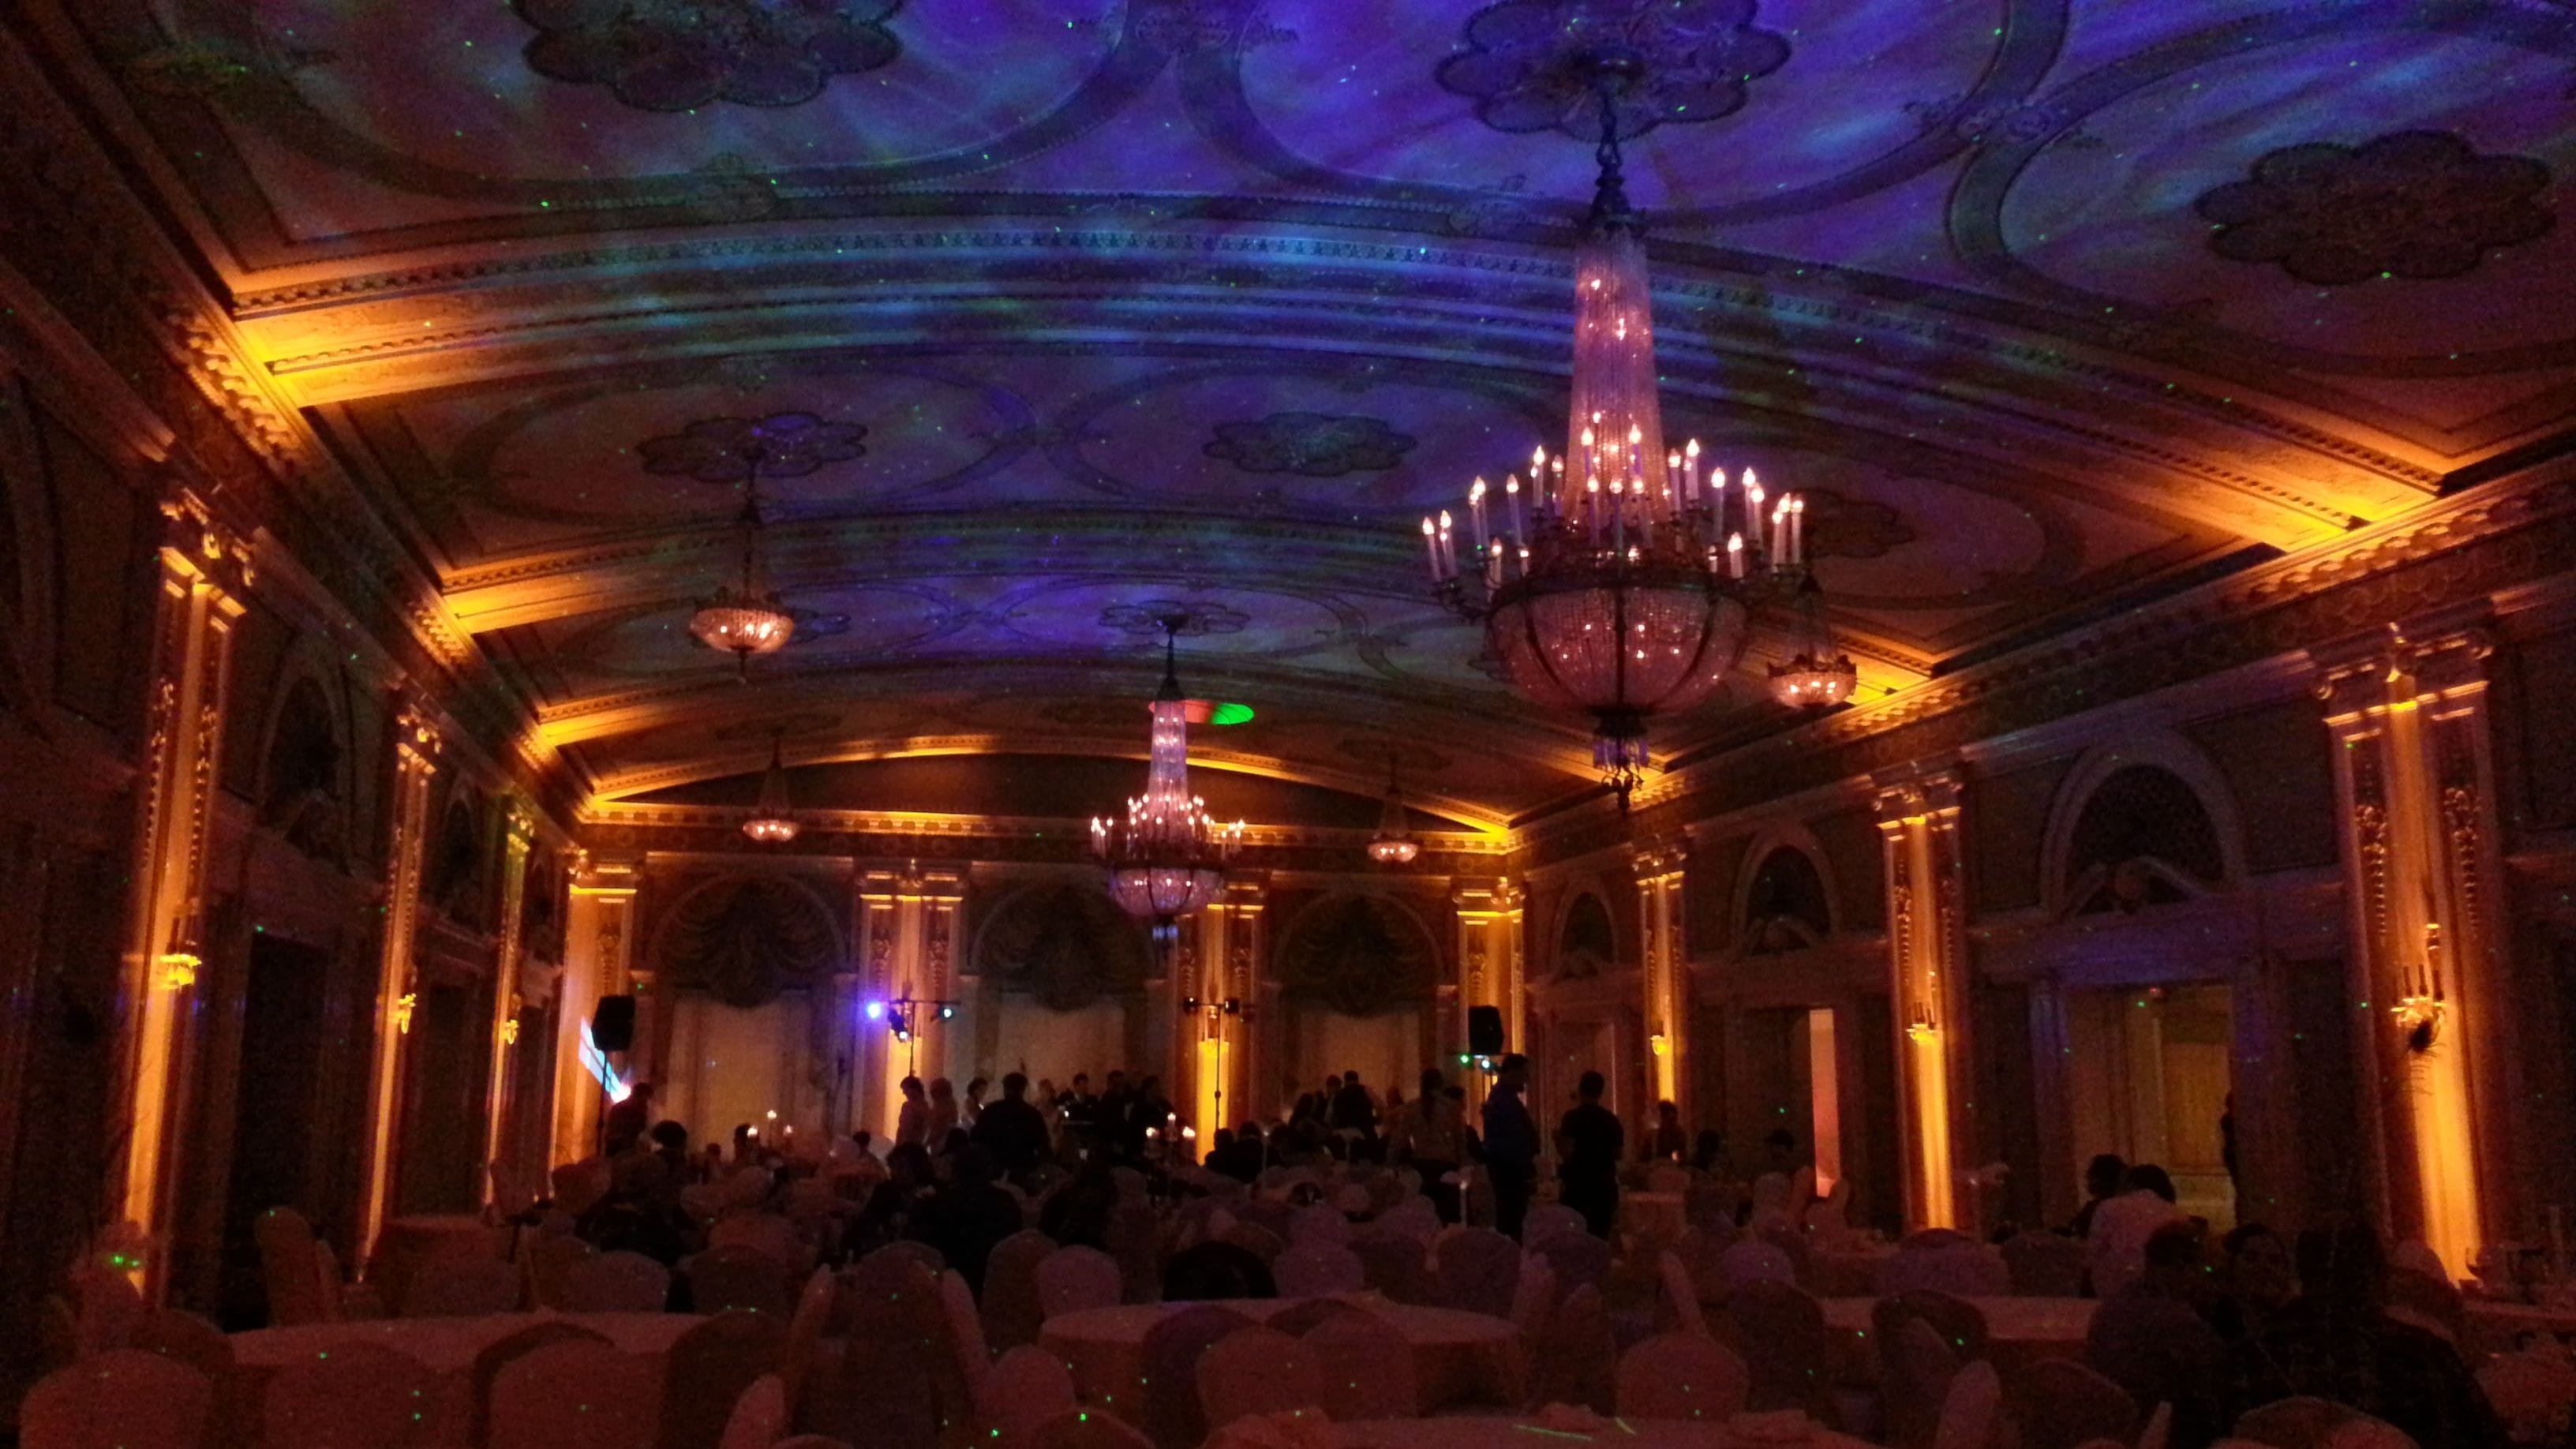 Wedding lighting at Greysolon Ballroom. Up lighting in amber with stars and Northern Lights dancing on the ceilnig.